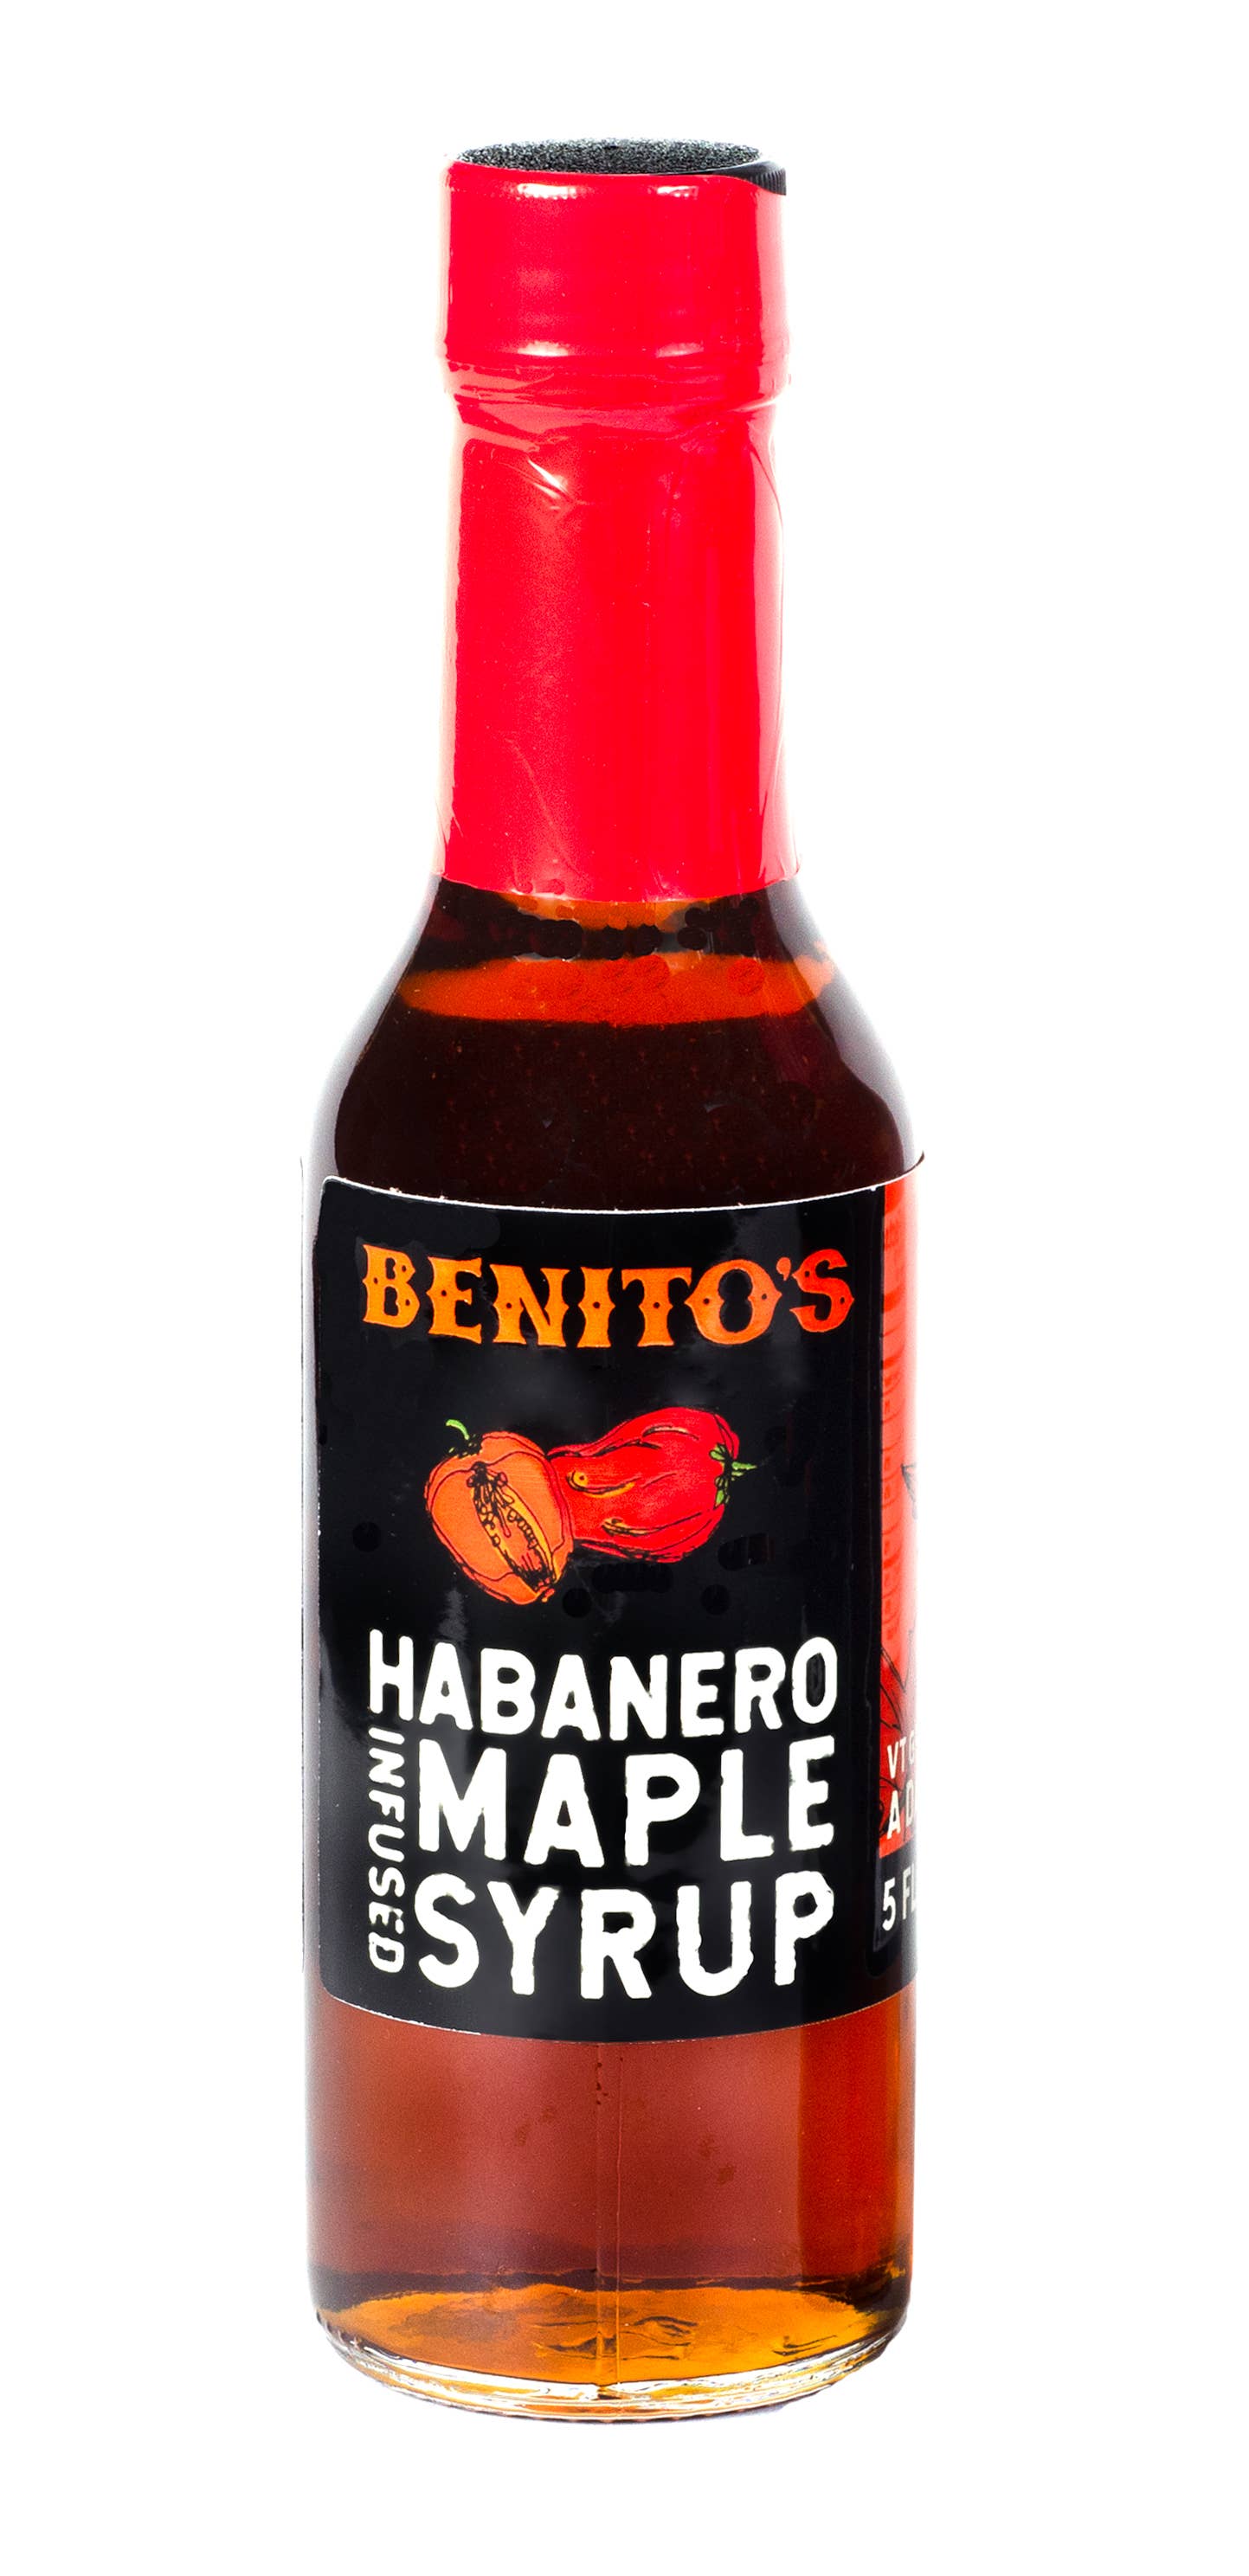 Vermont Condiment/ Benito's Hot Sauce - Habanero Infused Maple Syrup